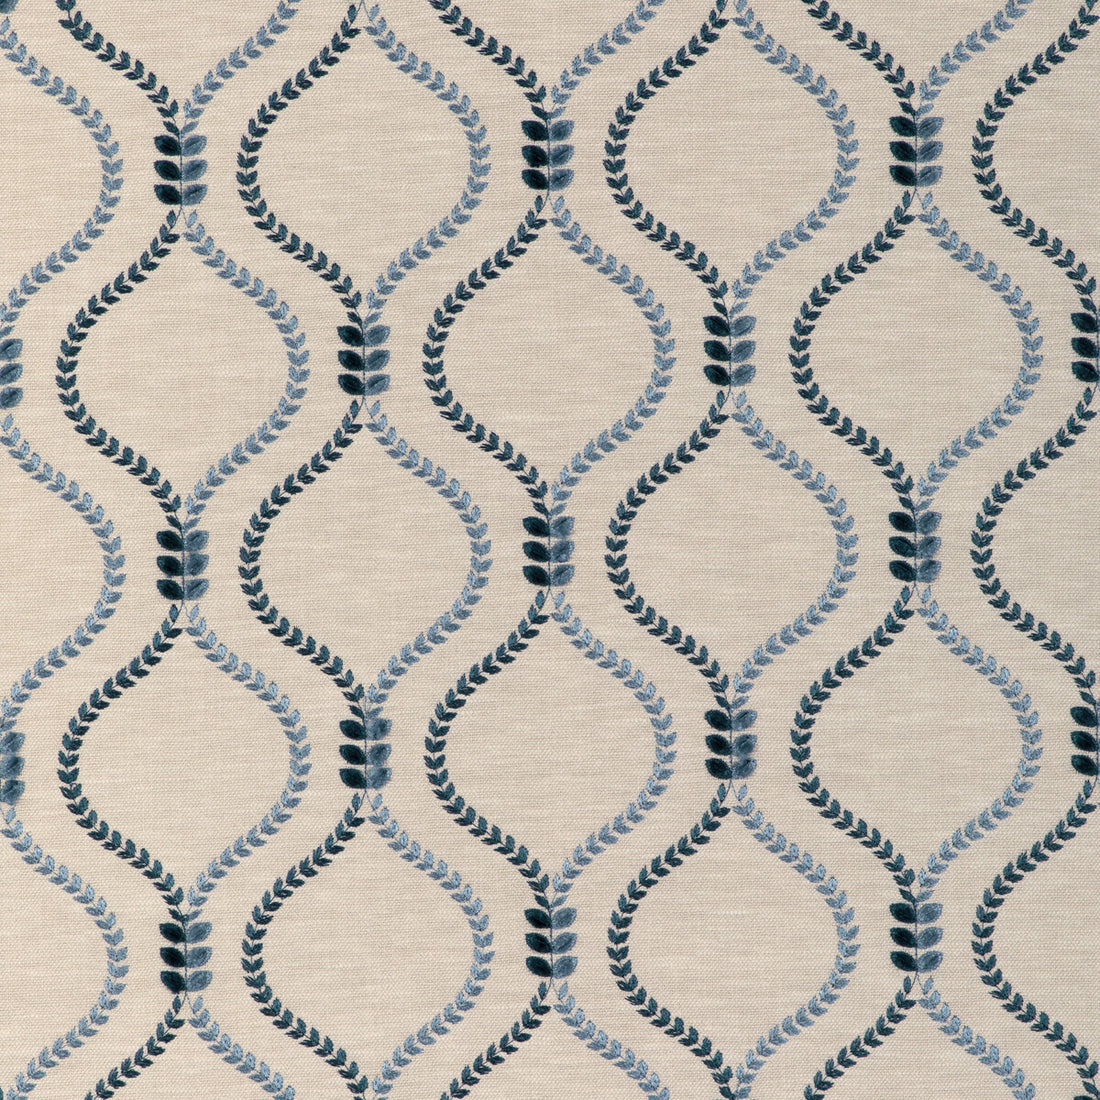 Kravet Basics fabric in 37160-516 color - pattern 37160.516.0 - by Kravet Basics in the Modern Embroideries III collection